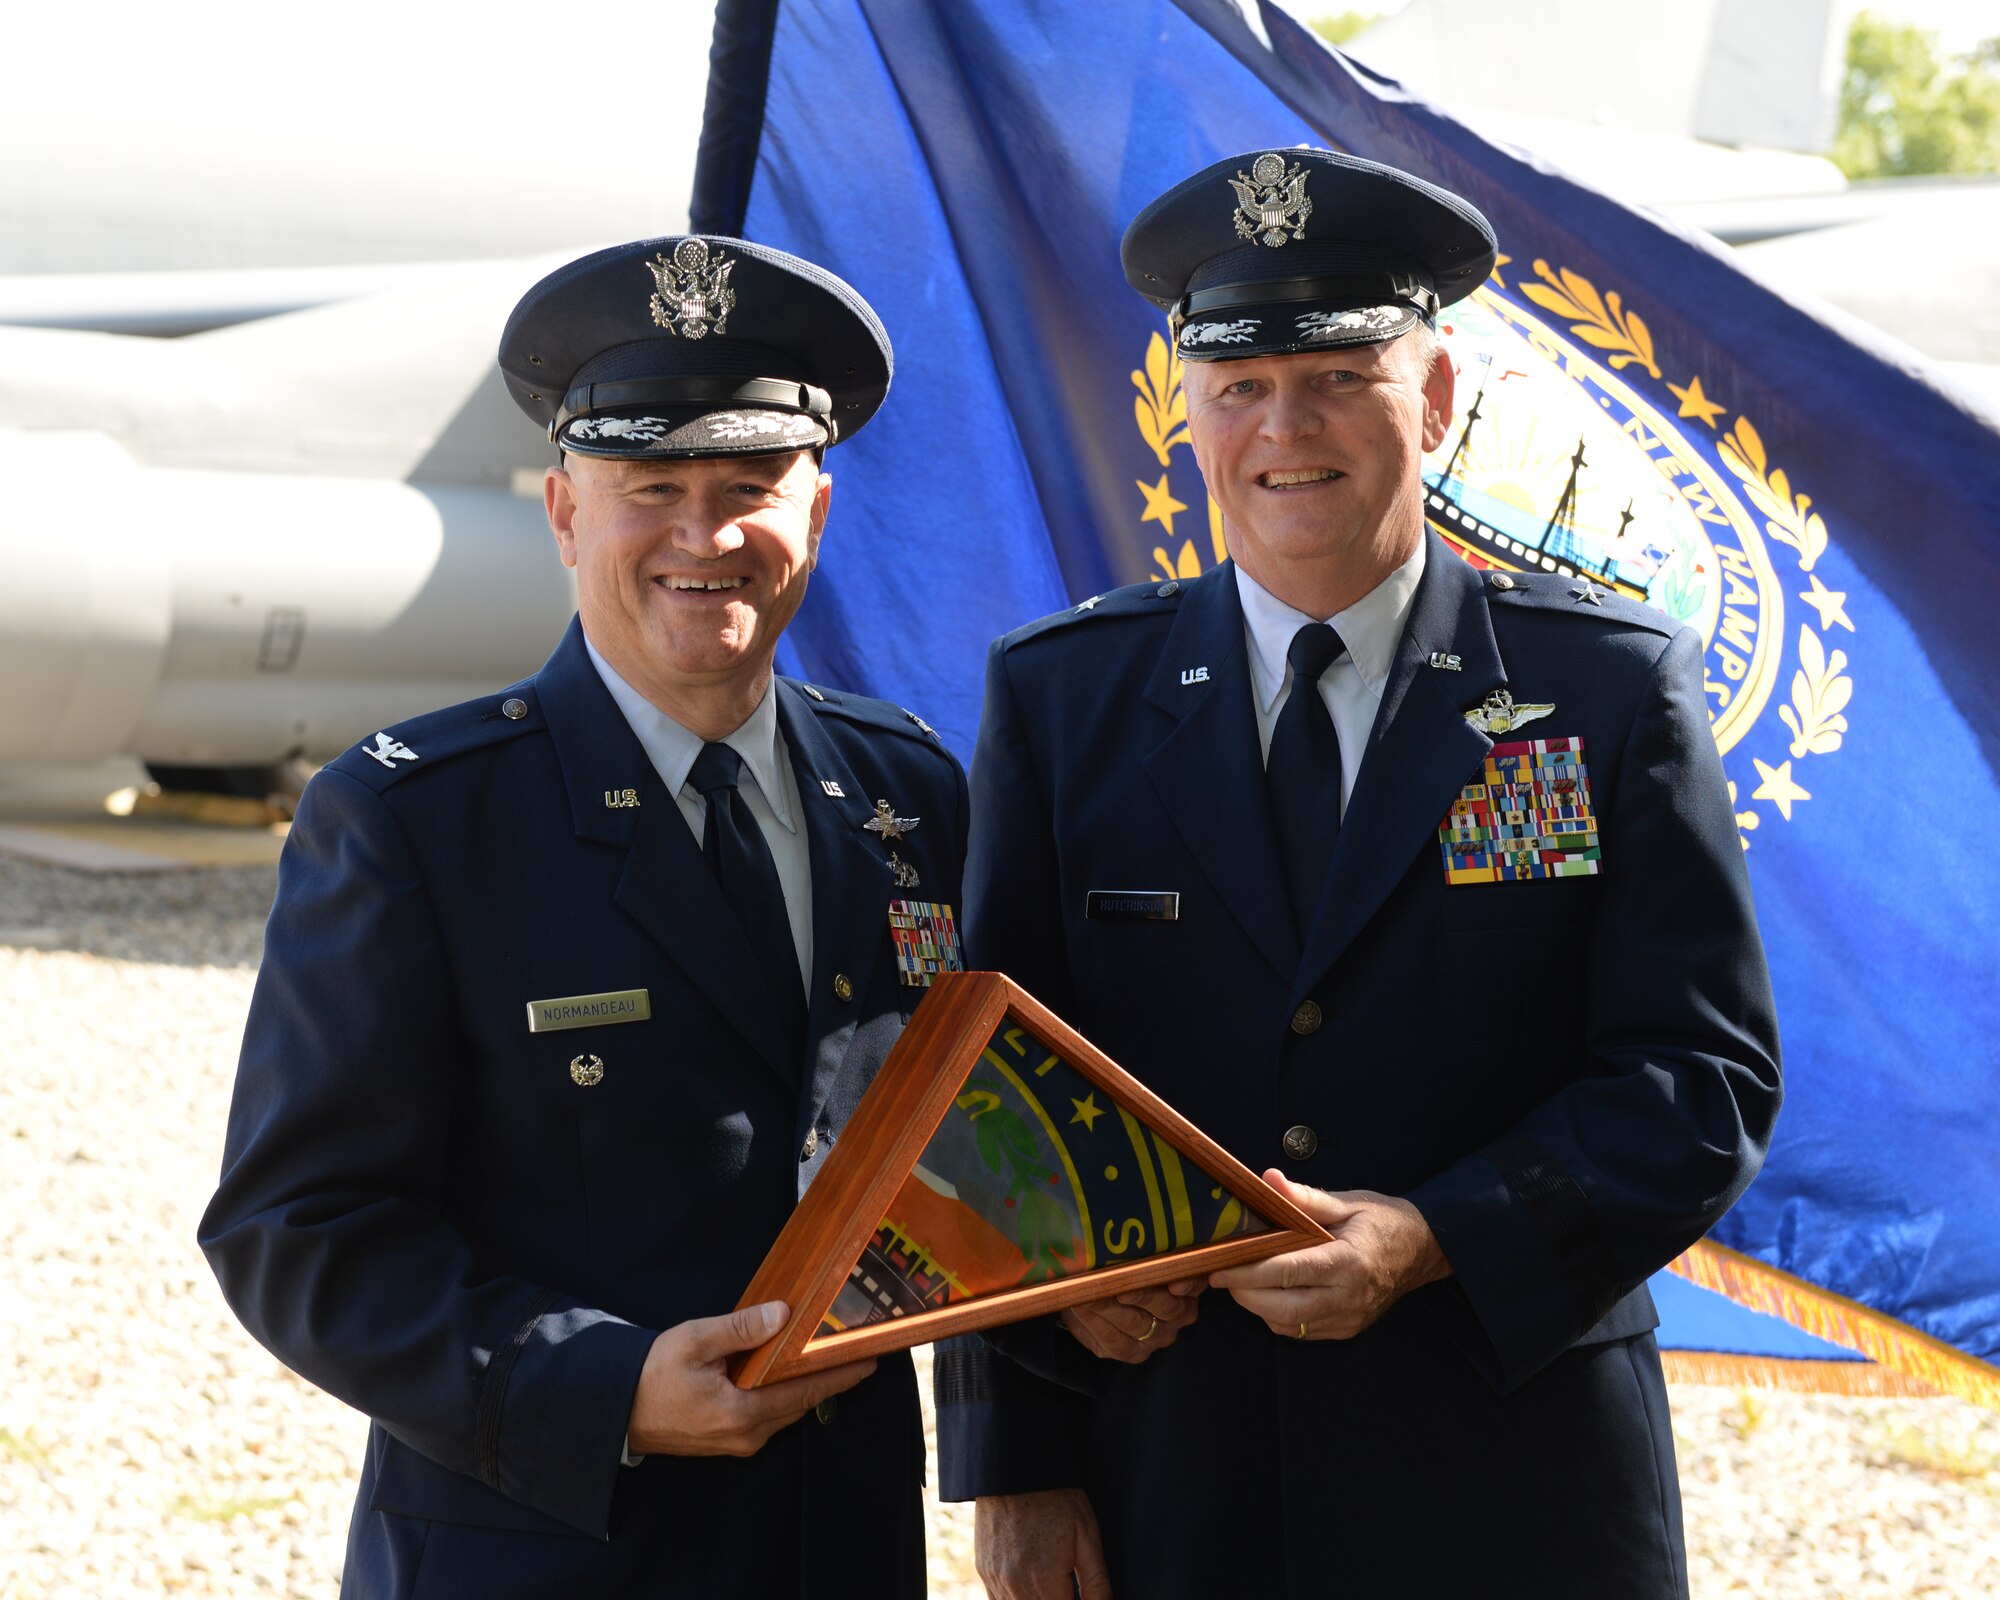 Brig. General Paul Hutchinson (right), N.H. Air National Guard chief of staff, presents former N.H. Air National Guard member, Col. Scott Normandeau a N.H. state flag during the colonel’s retirement ceremony here June 14. Normandeau retires with 30 years of service to the United States Air Force and Air National Guard. (U.S. Air National Guard photo by Staff Sgt. Curtis J. Lenz)